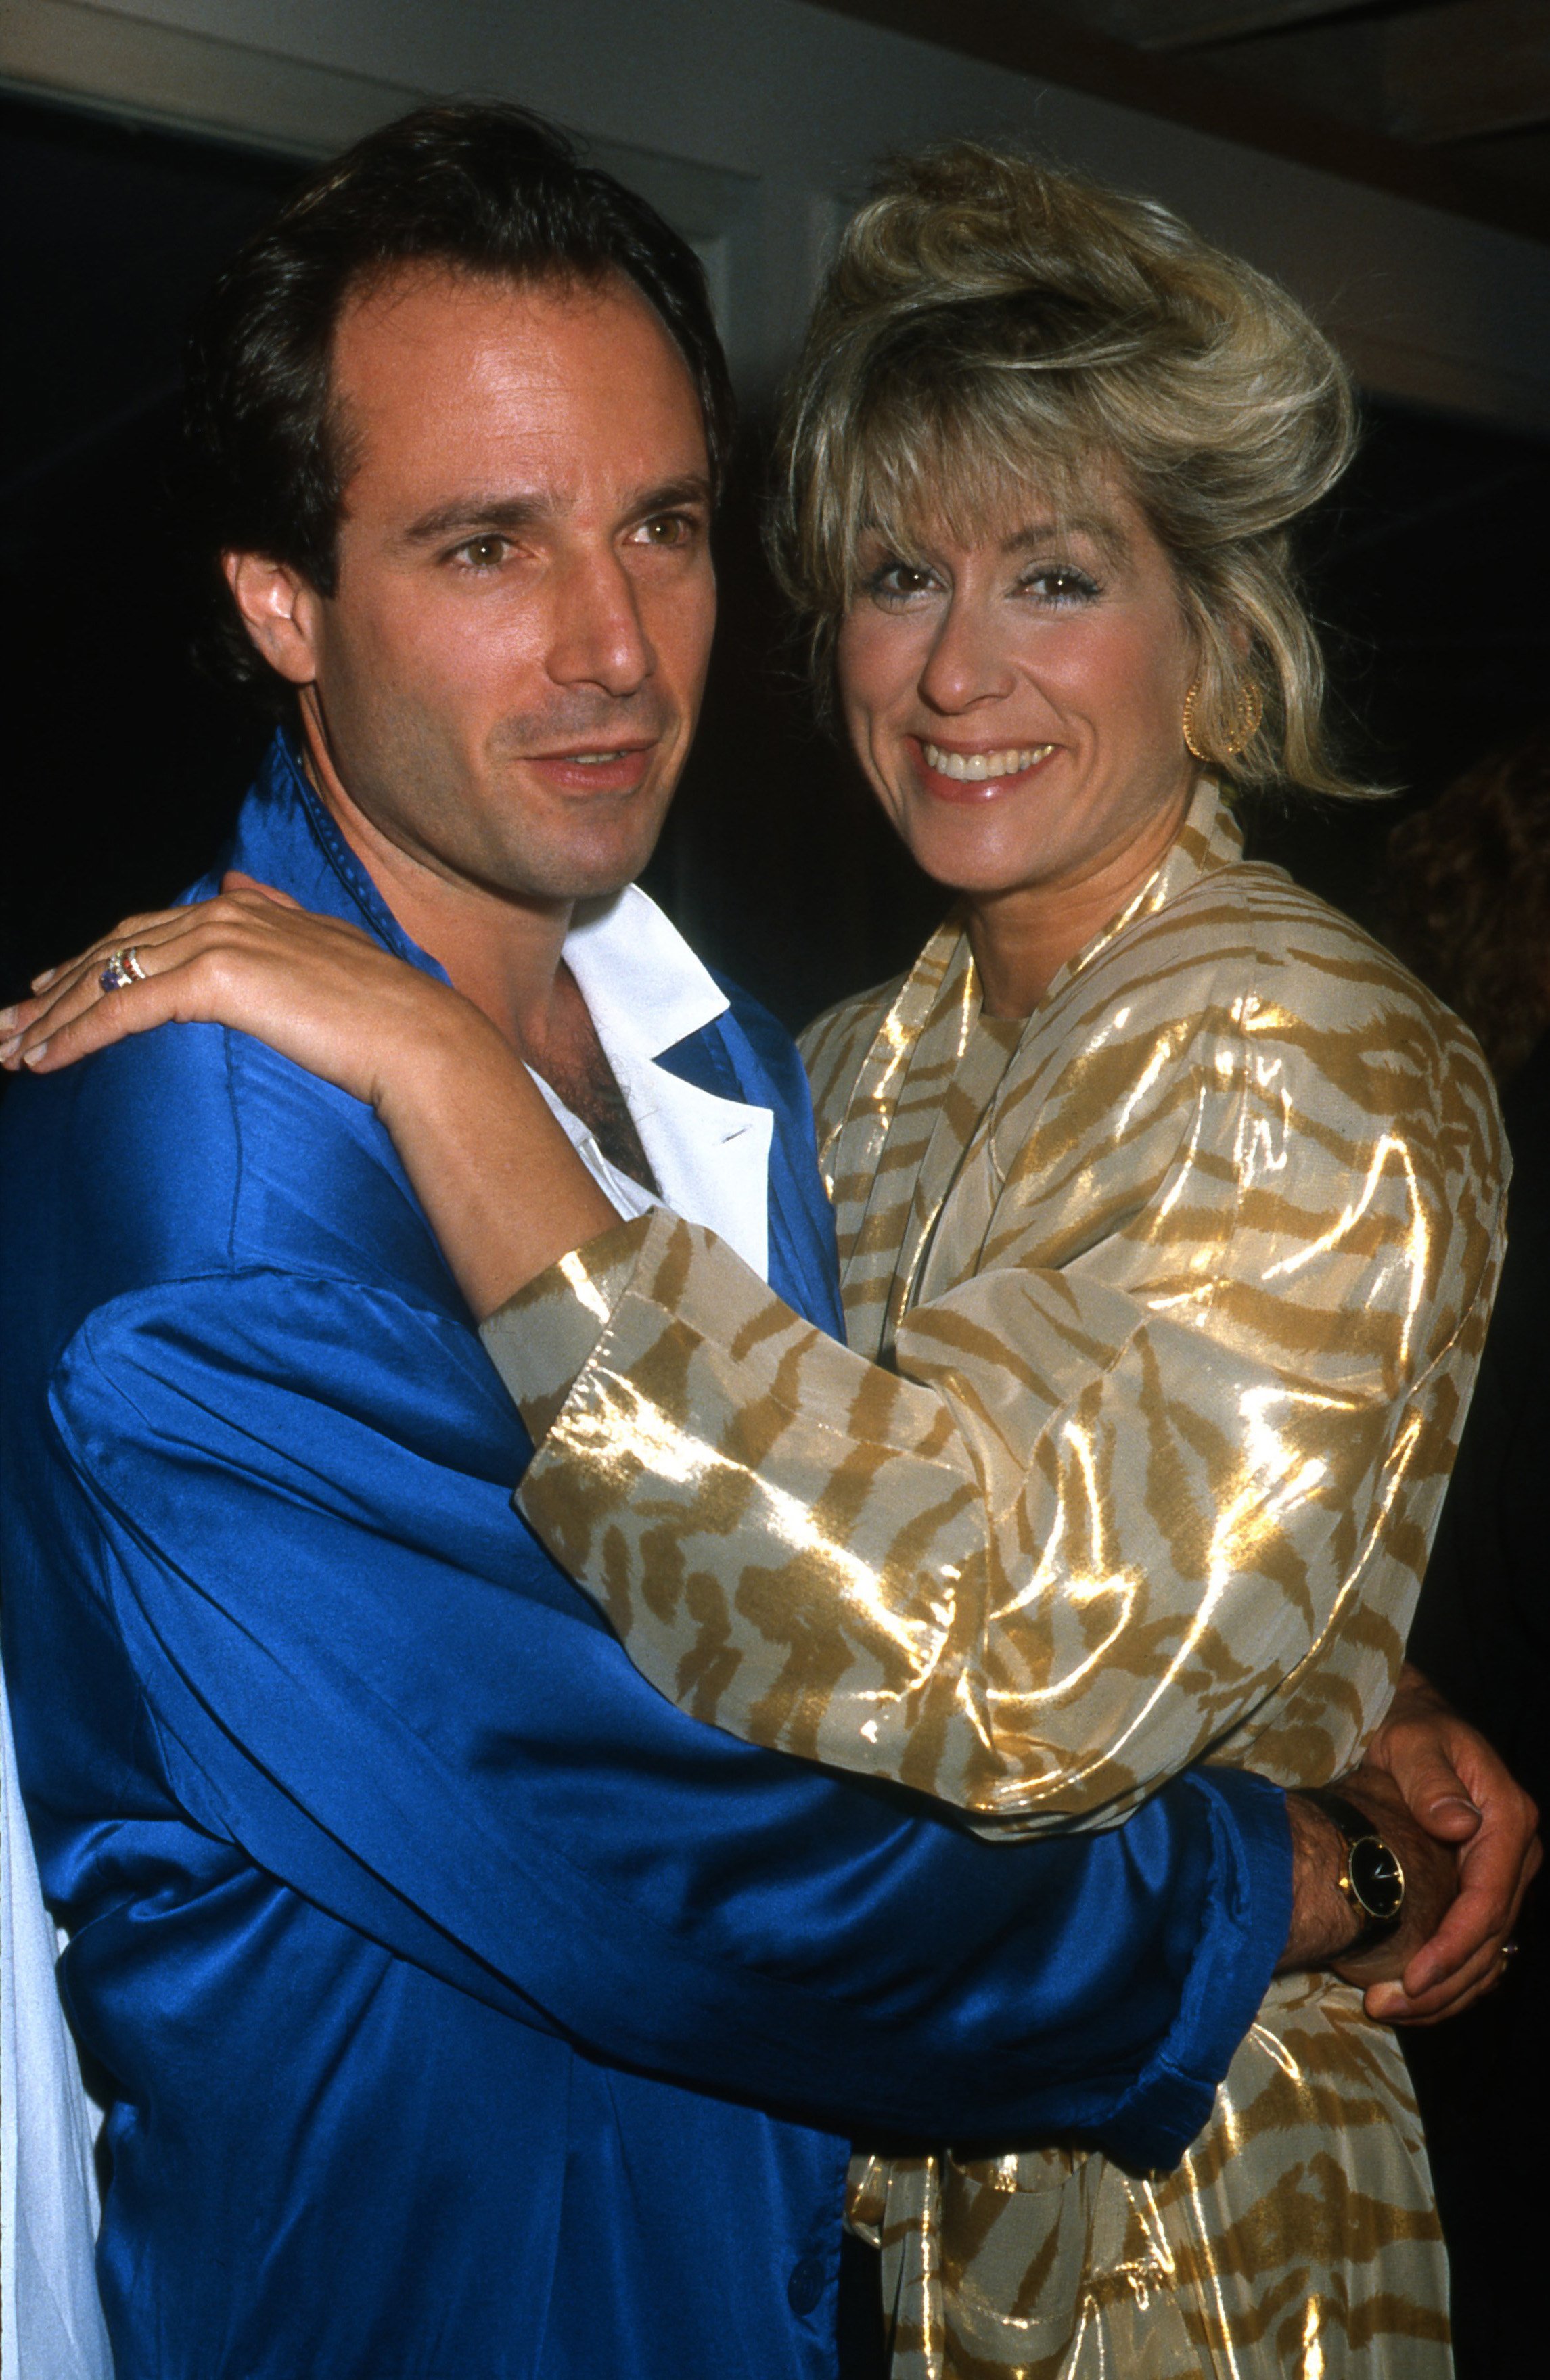  Judith Light and her husband actor Robert Desiderio attend an event circa 1987 in Los Angeles, California. | Source: Getty Images